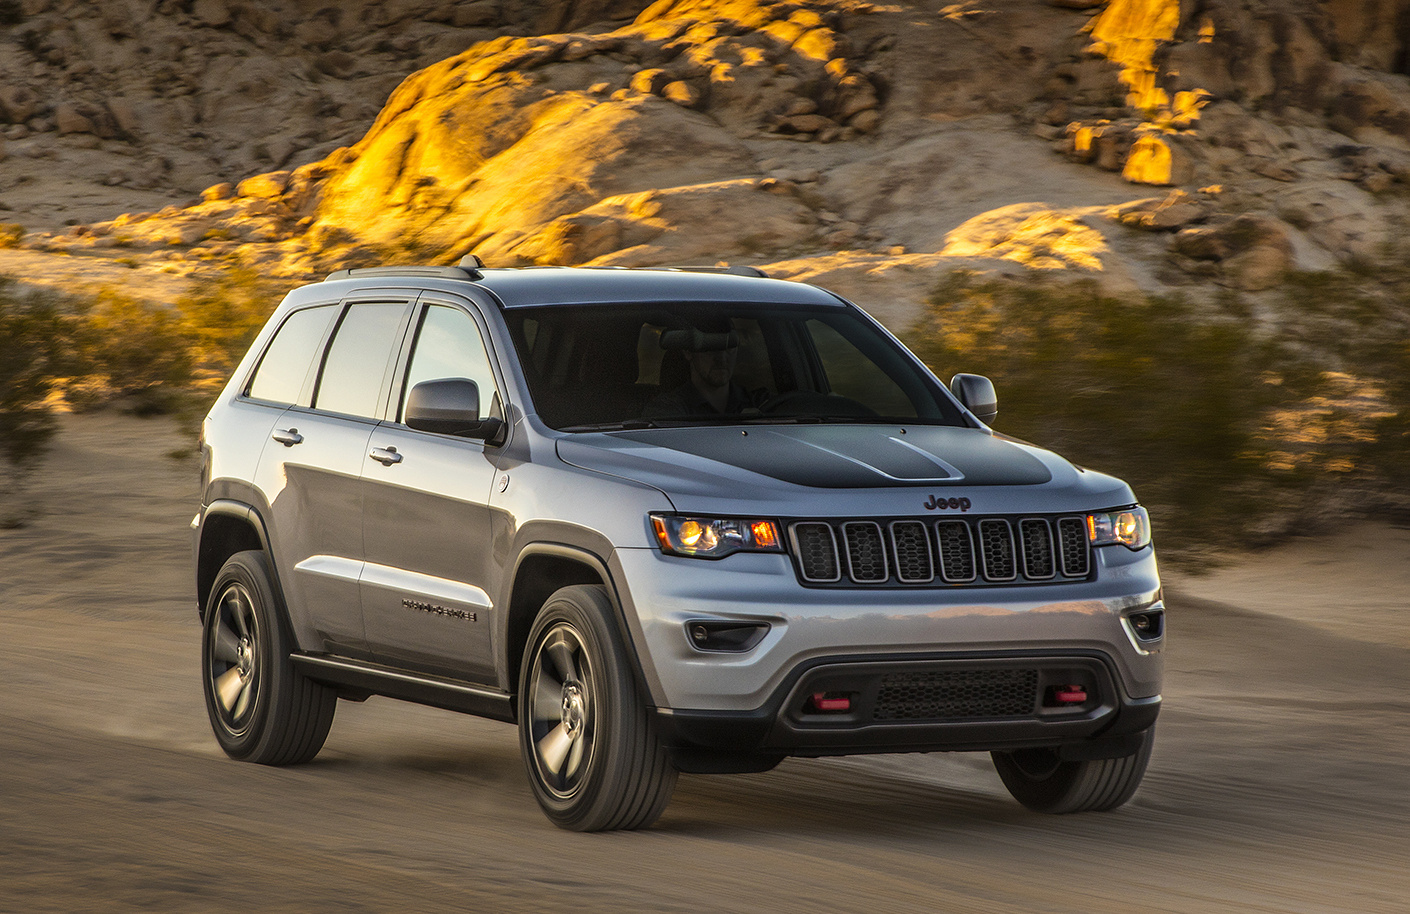 2017 Jeep Grand Cherokee Review & Ratings